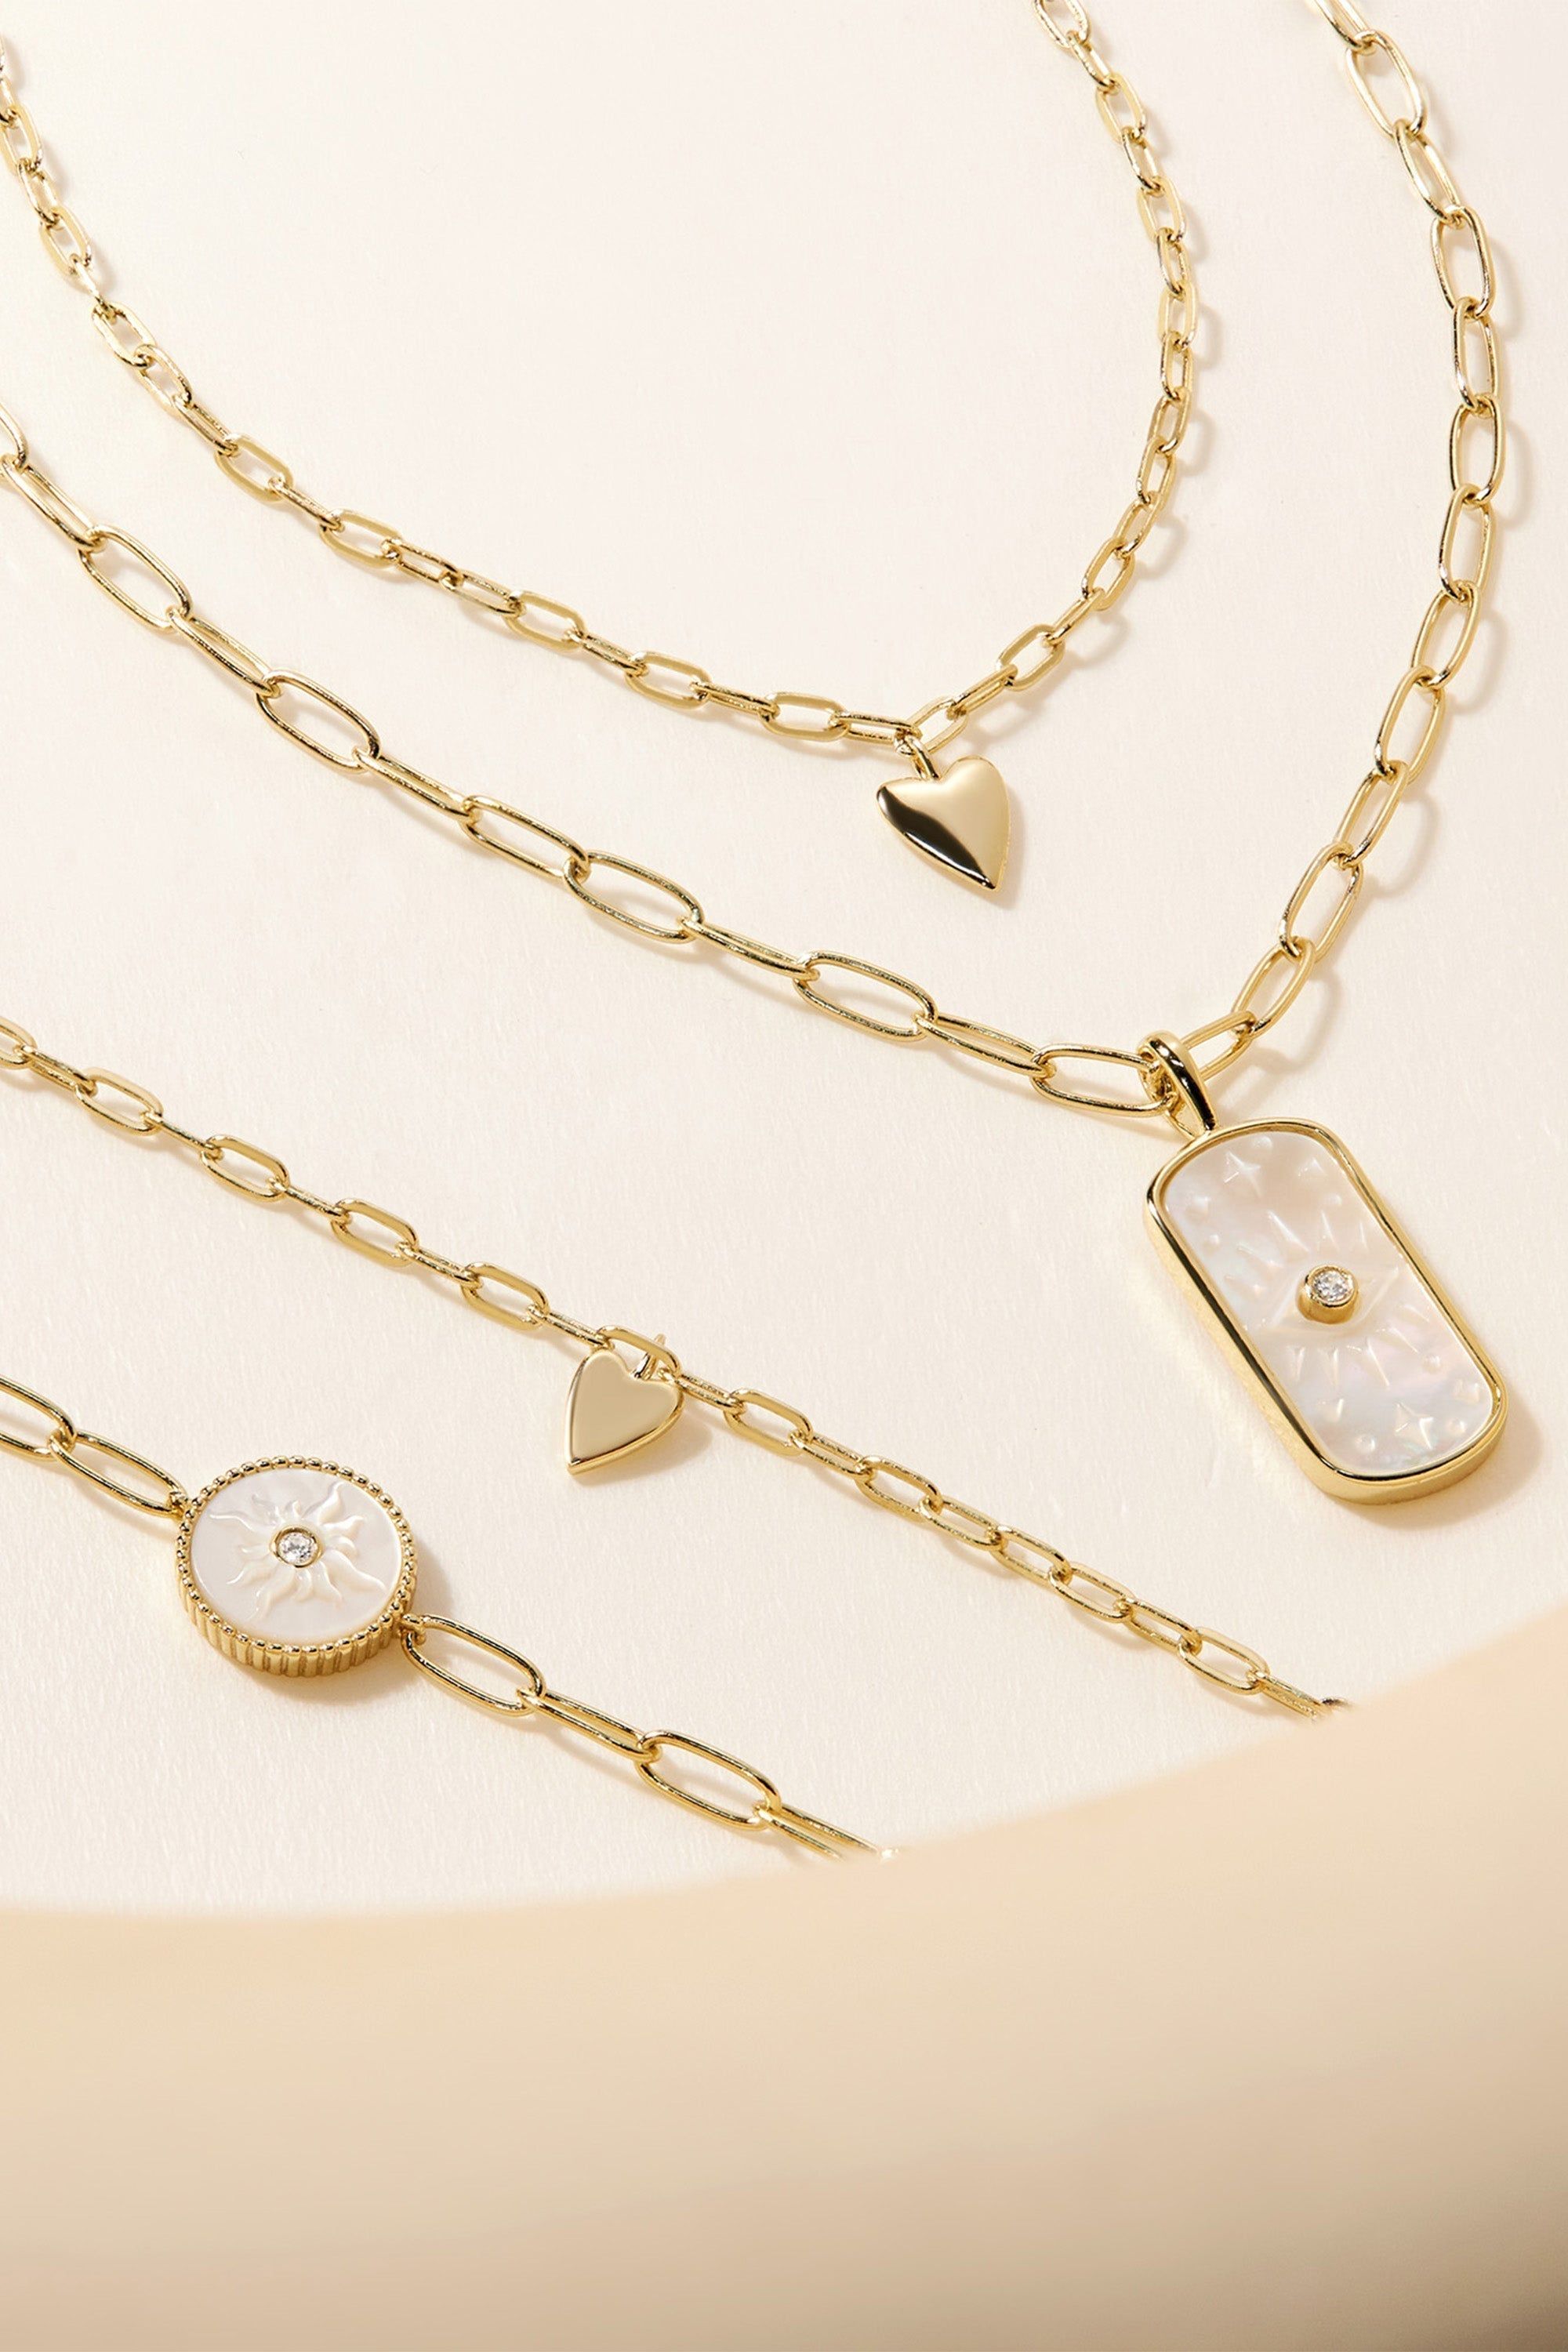 a collection of necklaces on a white surface